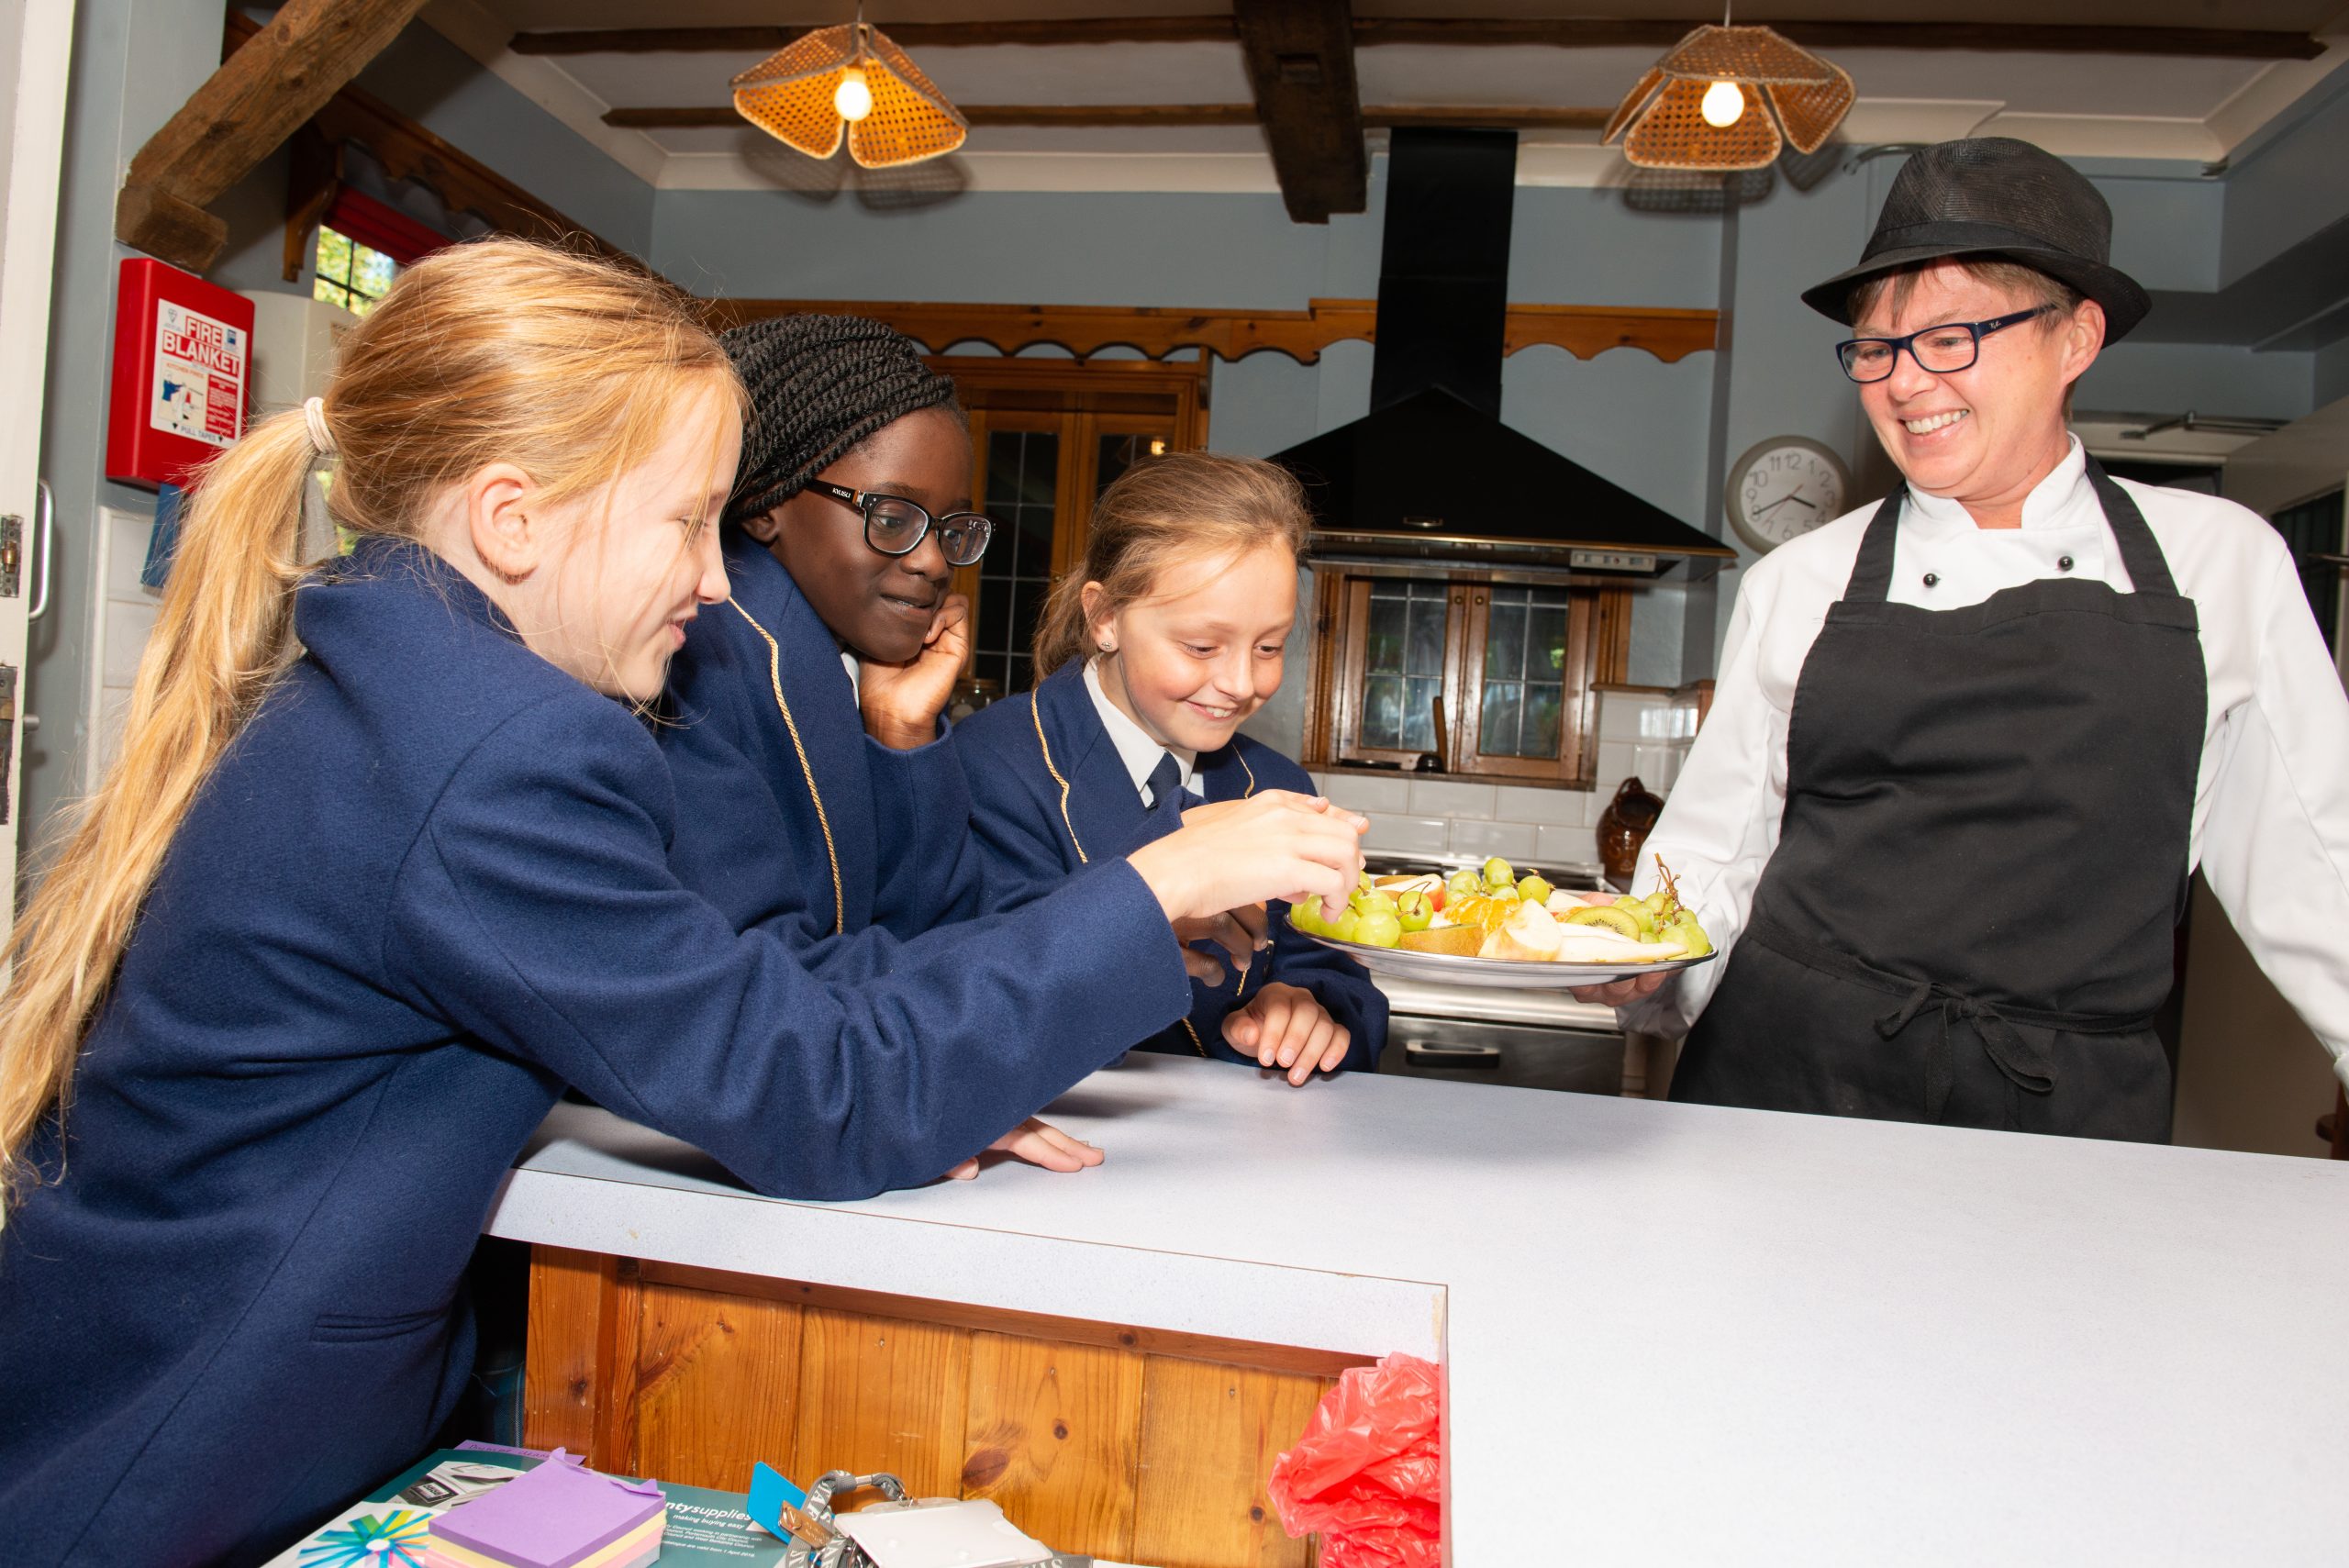 Three Rookwood boarding school students are being served food by the friendly Rookwood School staff.